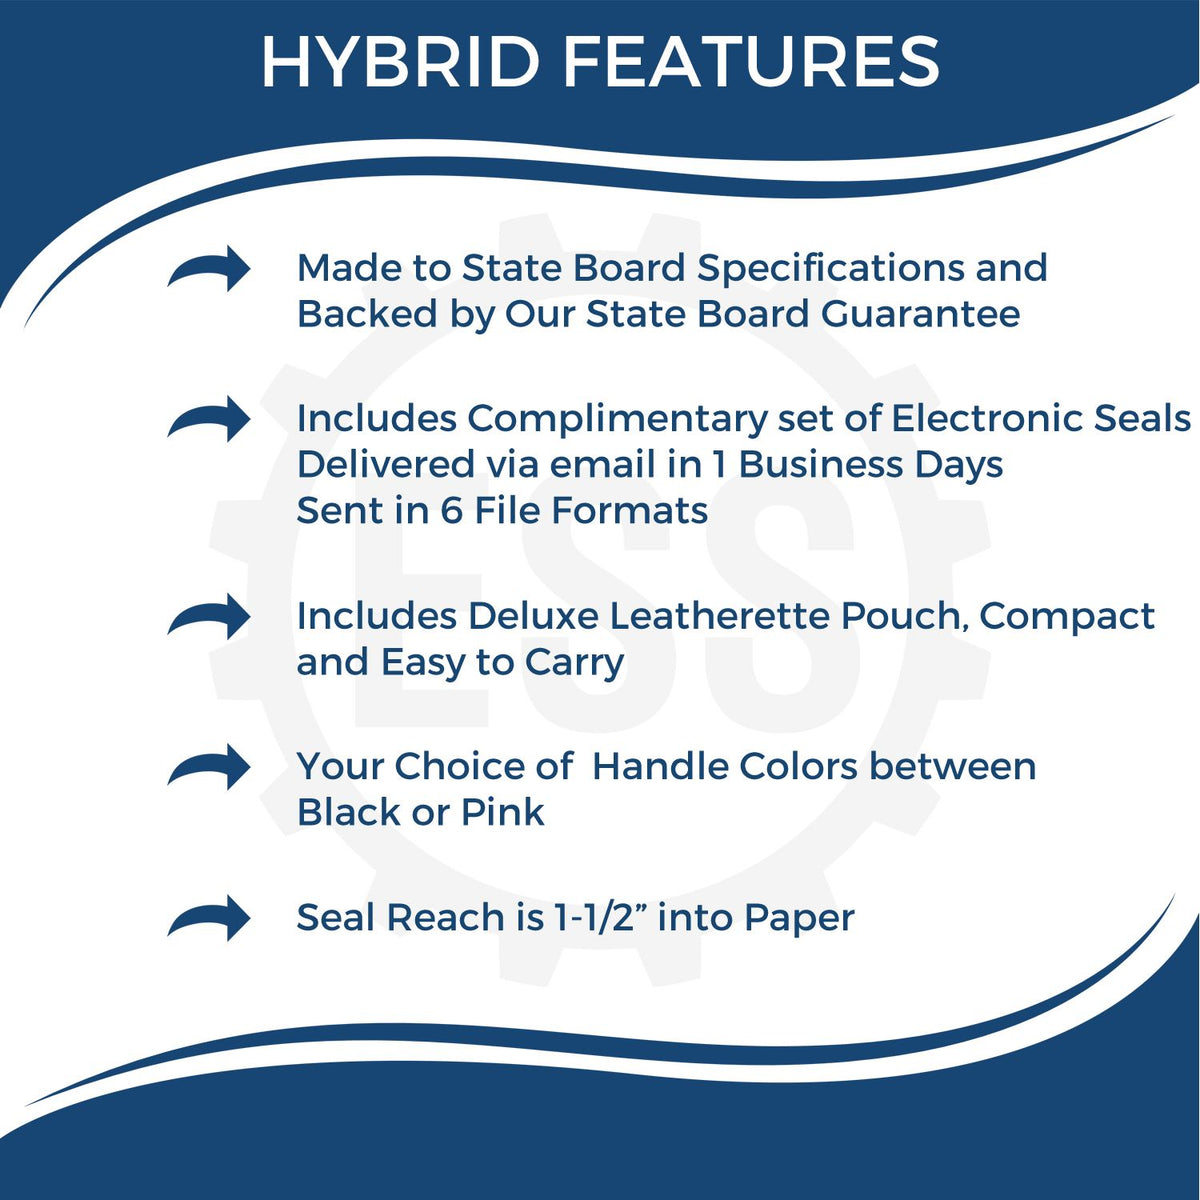 A picture of an infographic highlighting the selling points for the Hybrid Delaware Land Surveyor Seal